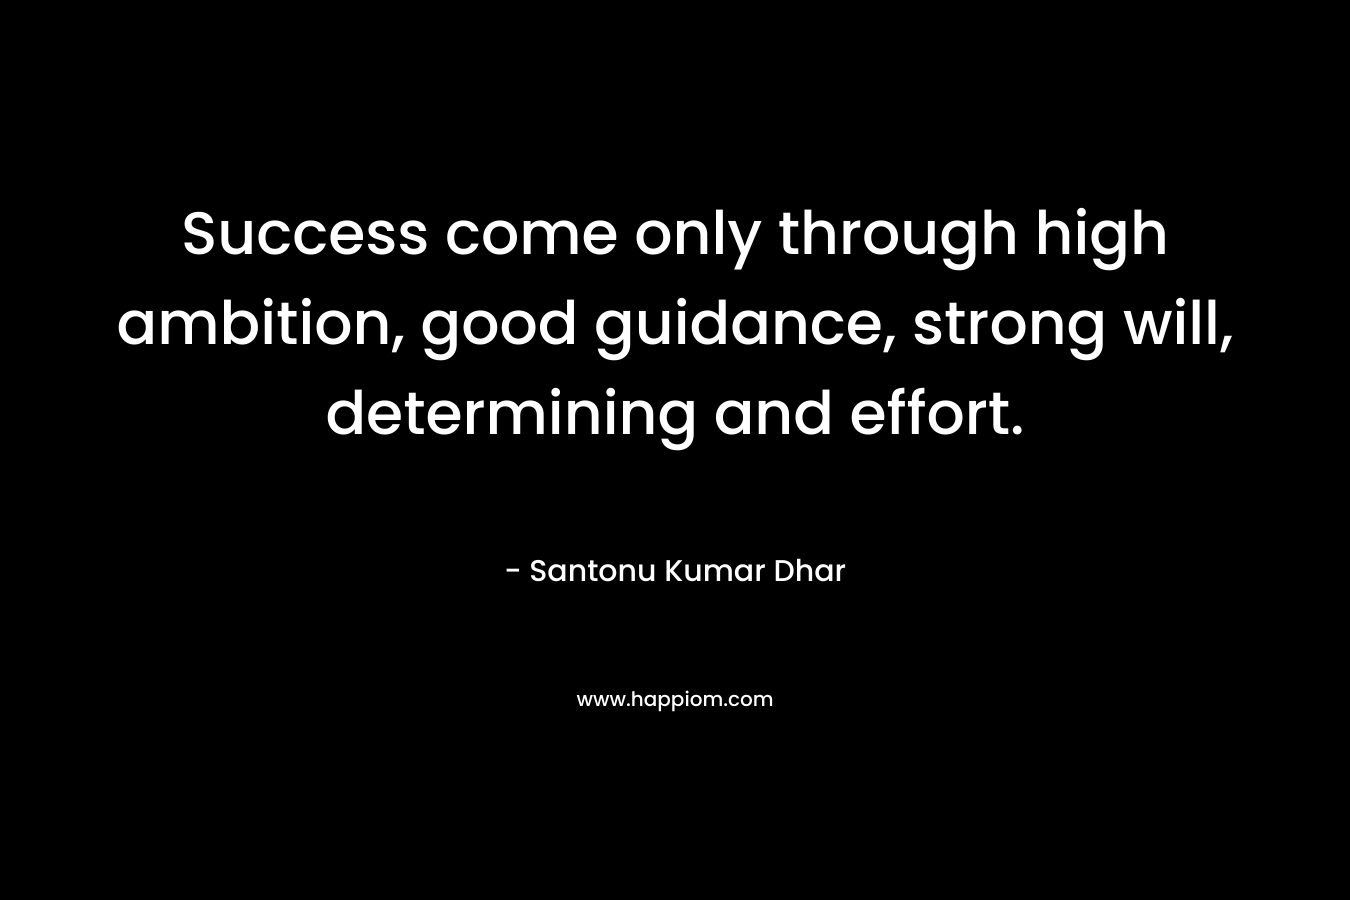 Success come only through high ambition, good guidance, strong will, determining and effort.